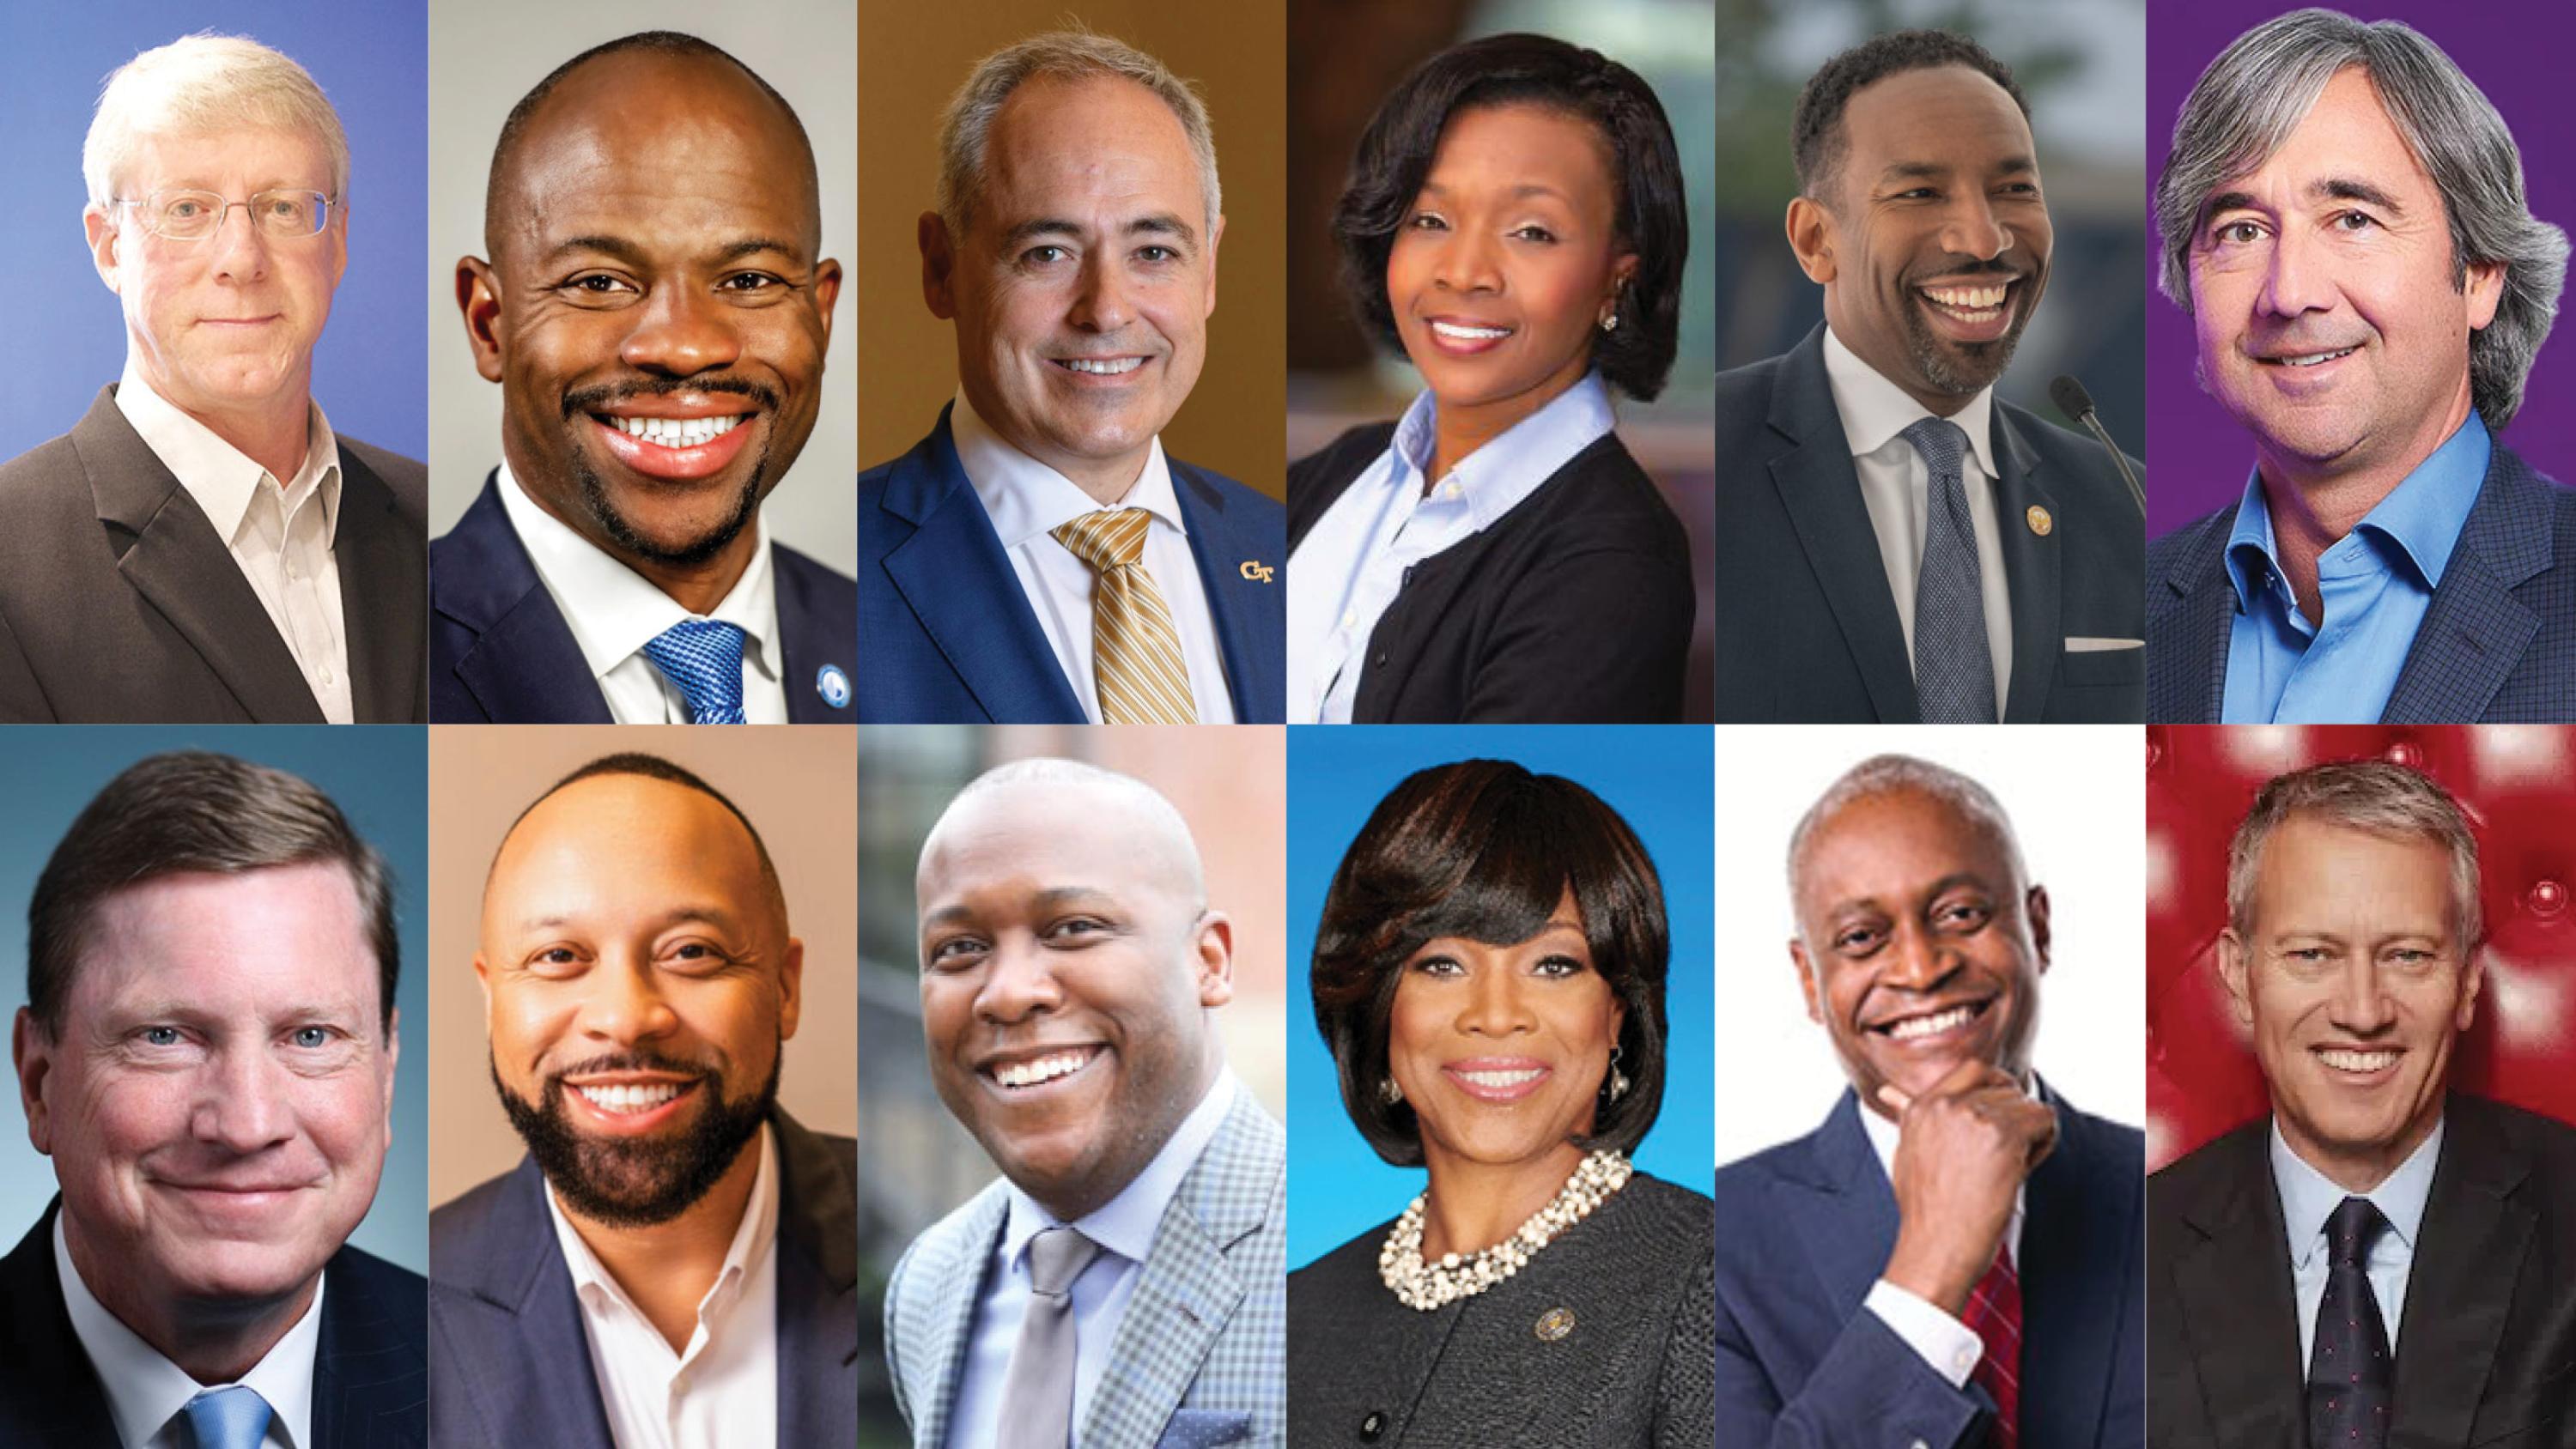 Georgia Trend 2023 Influential Georgians - Top row (from left to right): John Avery, Brian Blake, Ángel Cabrera, Lisa Cupid, Andre Dickens, Jimmy Etheredge. Bottom row: Tom Fanning, Paul Judge, Jerald Mitchell, Valerie Montgomery Rice, Raphael Bostic, James Quincey. 